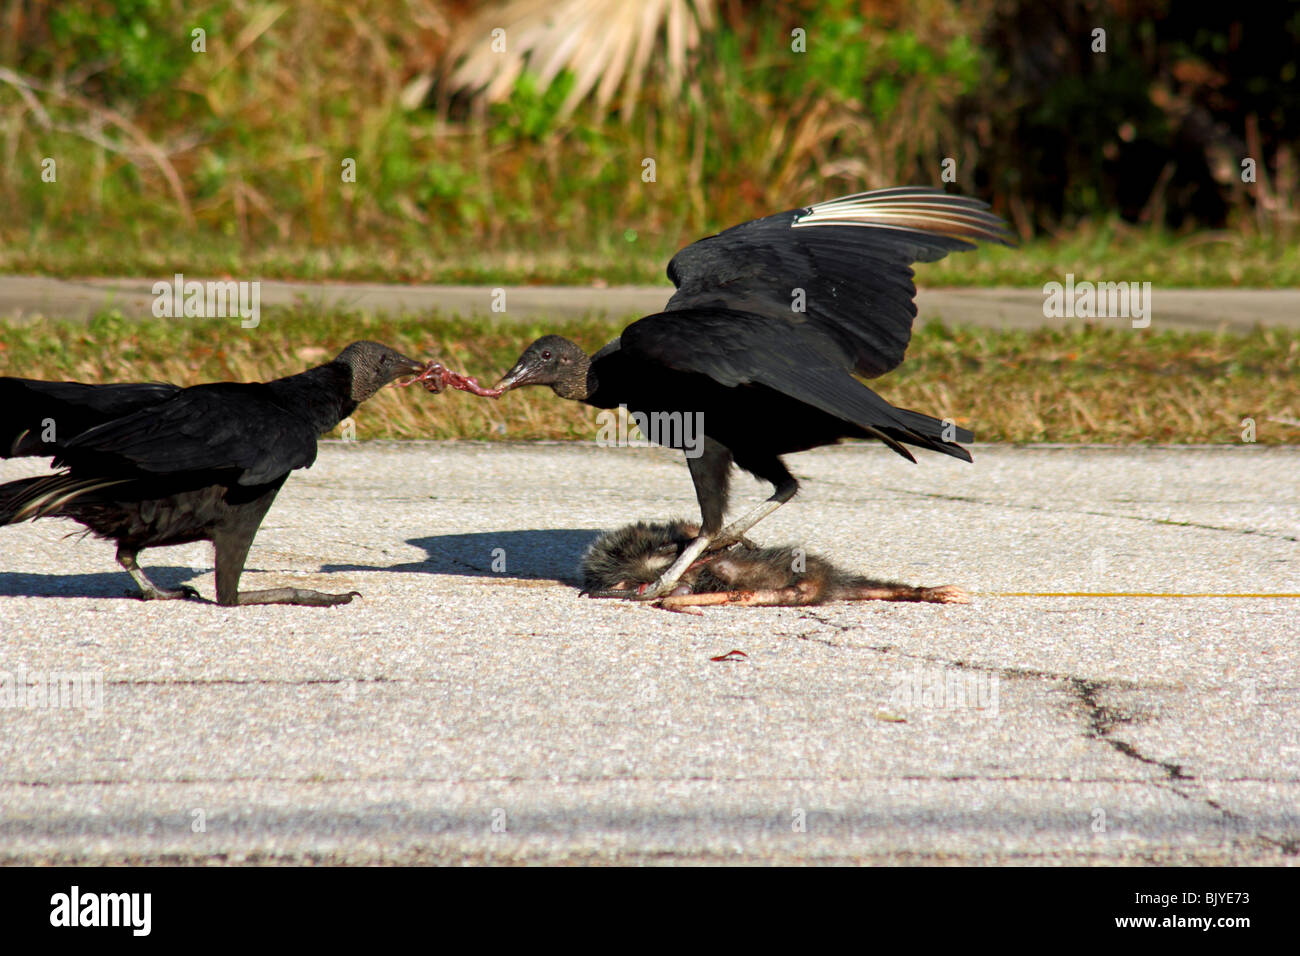 Two Black Vultures eating a road killed Possom Stock Photo